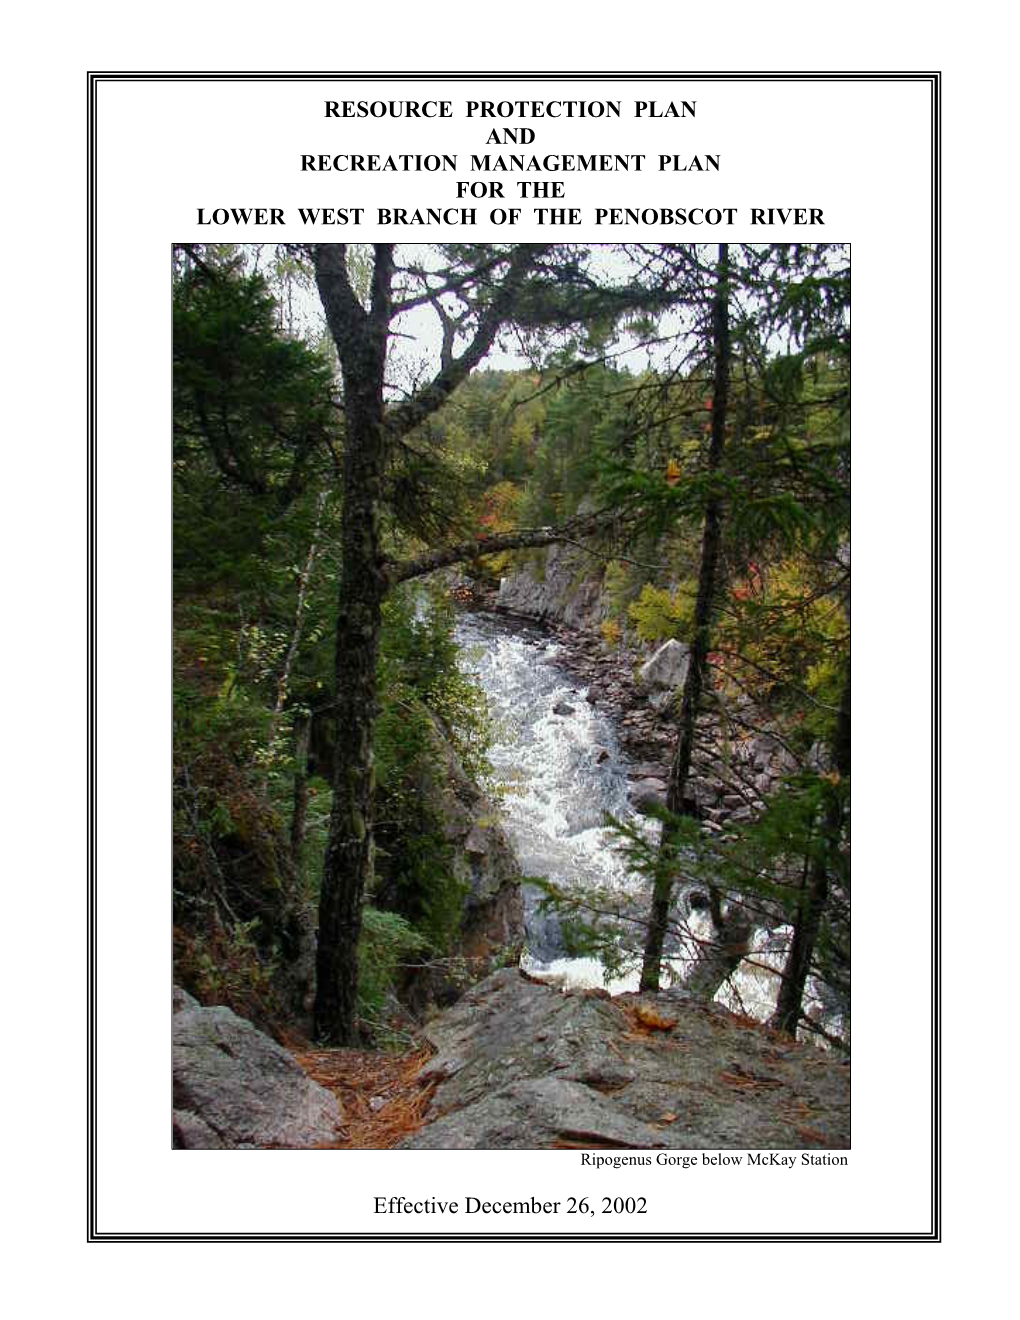 RESOURCE PROTECTION PLAN and RECREATION MANAGEMENT PLAN for the LOWER WEST BRANCH of the PENOBSCOT RIVER Effective De